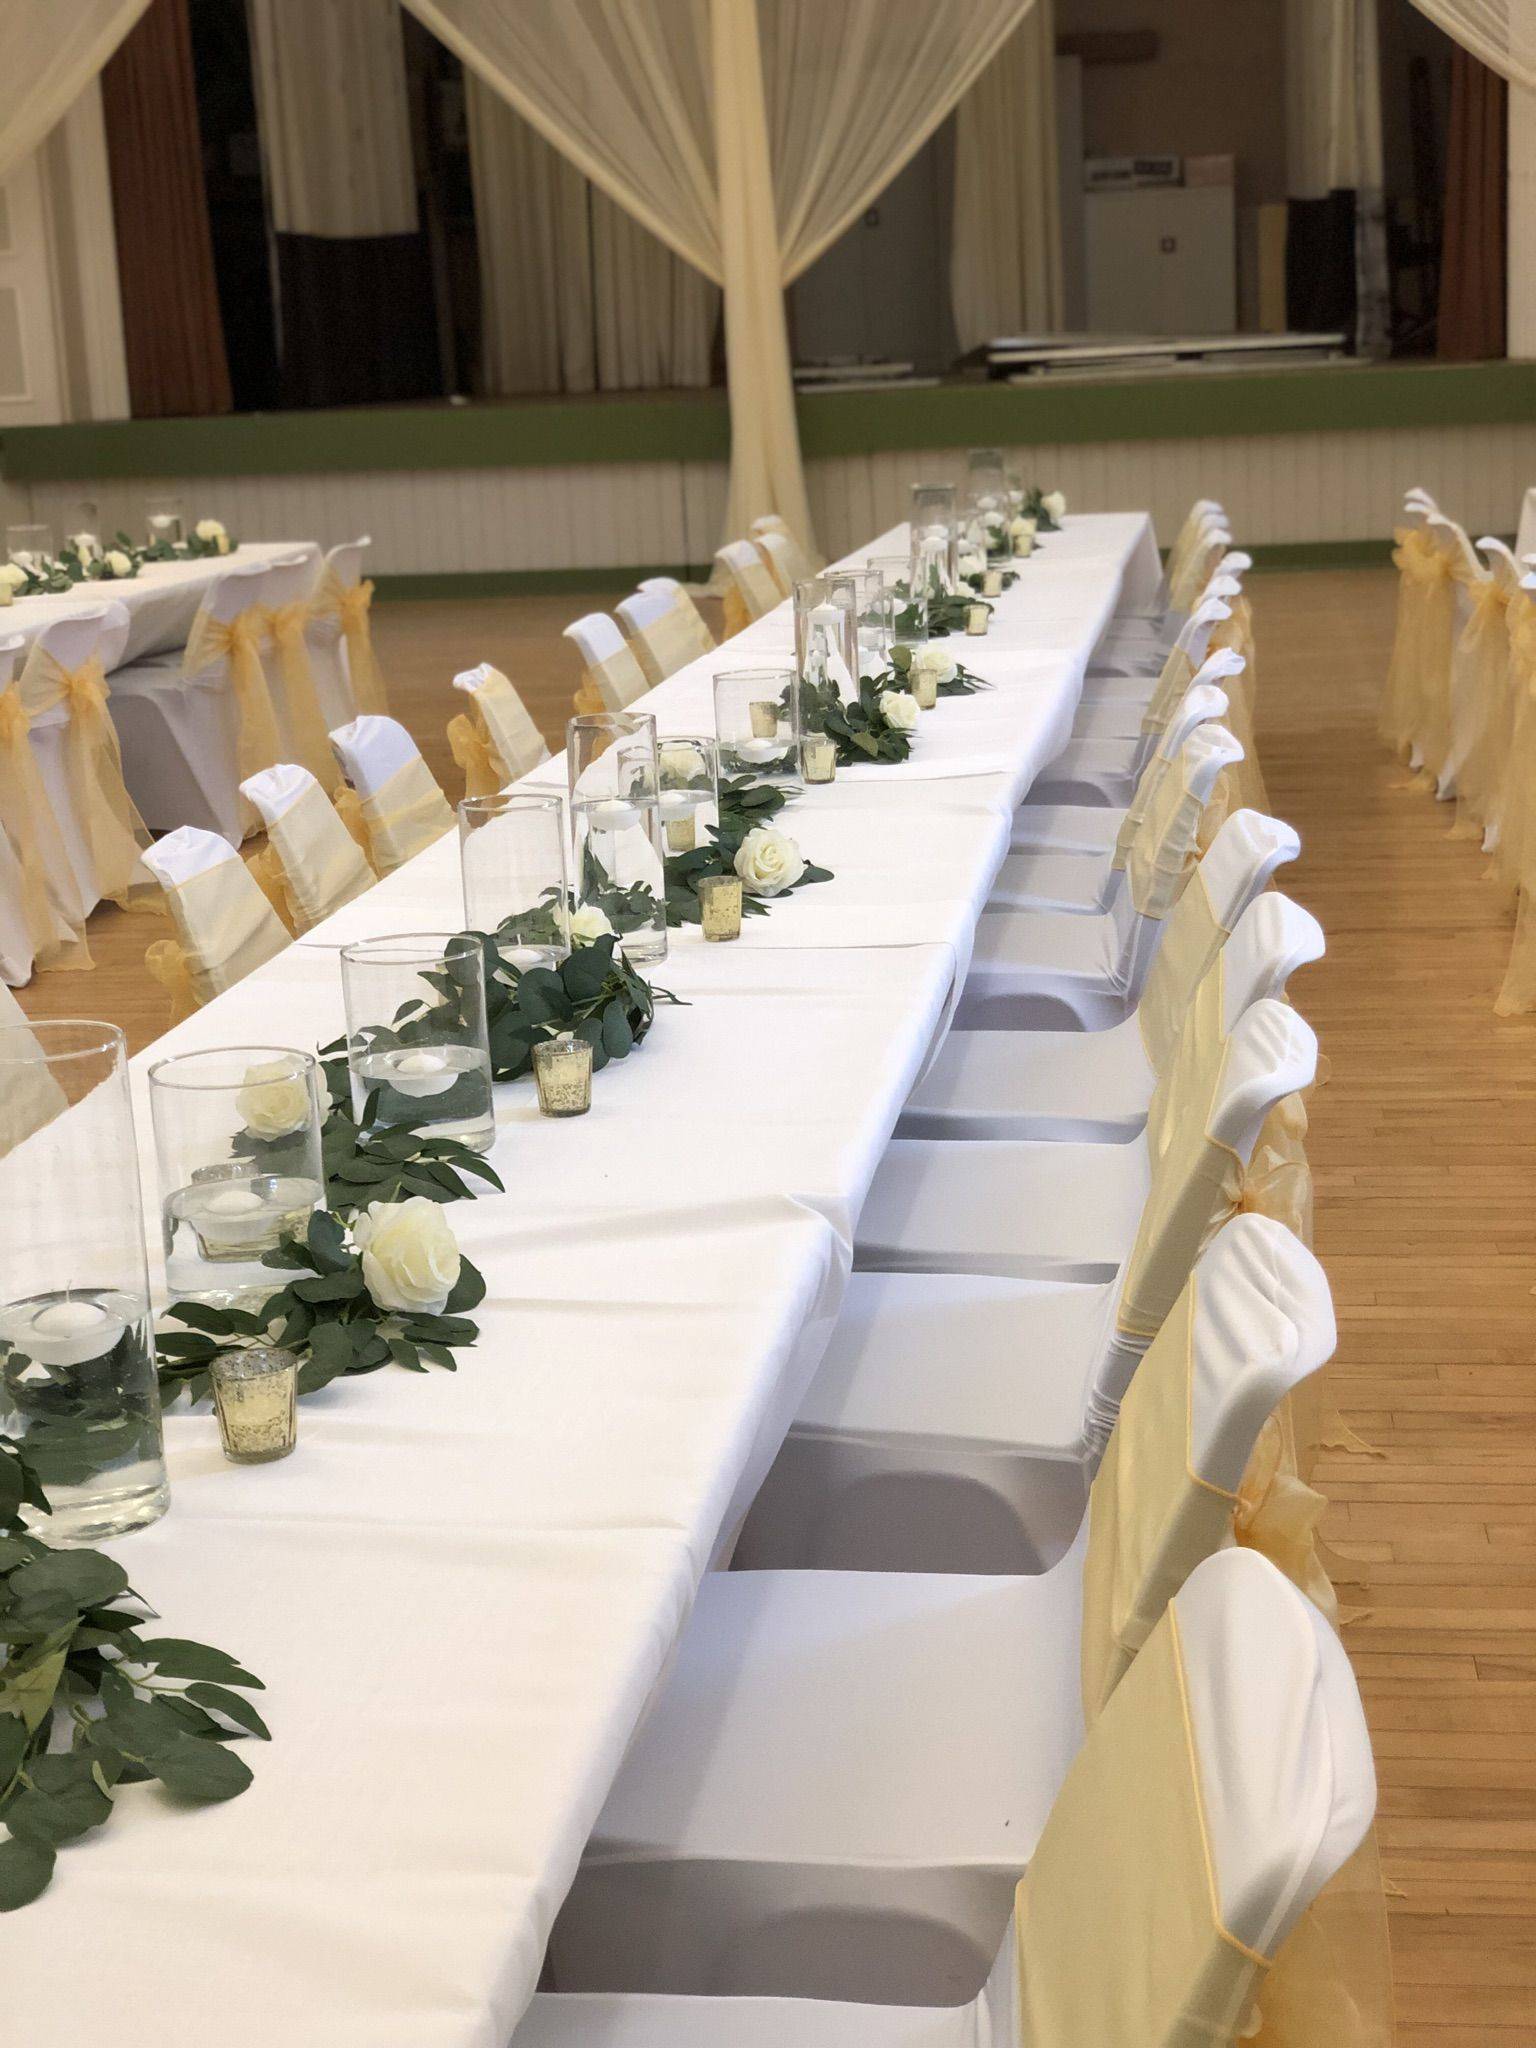 a long table with white linens and flowers on it.